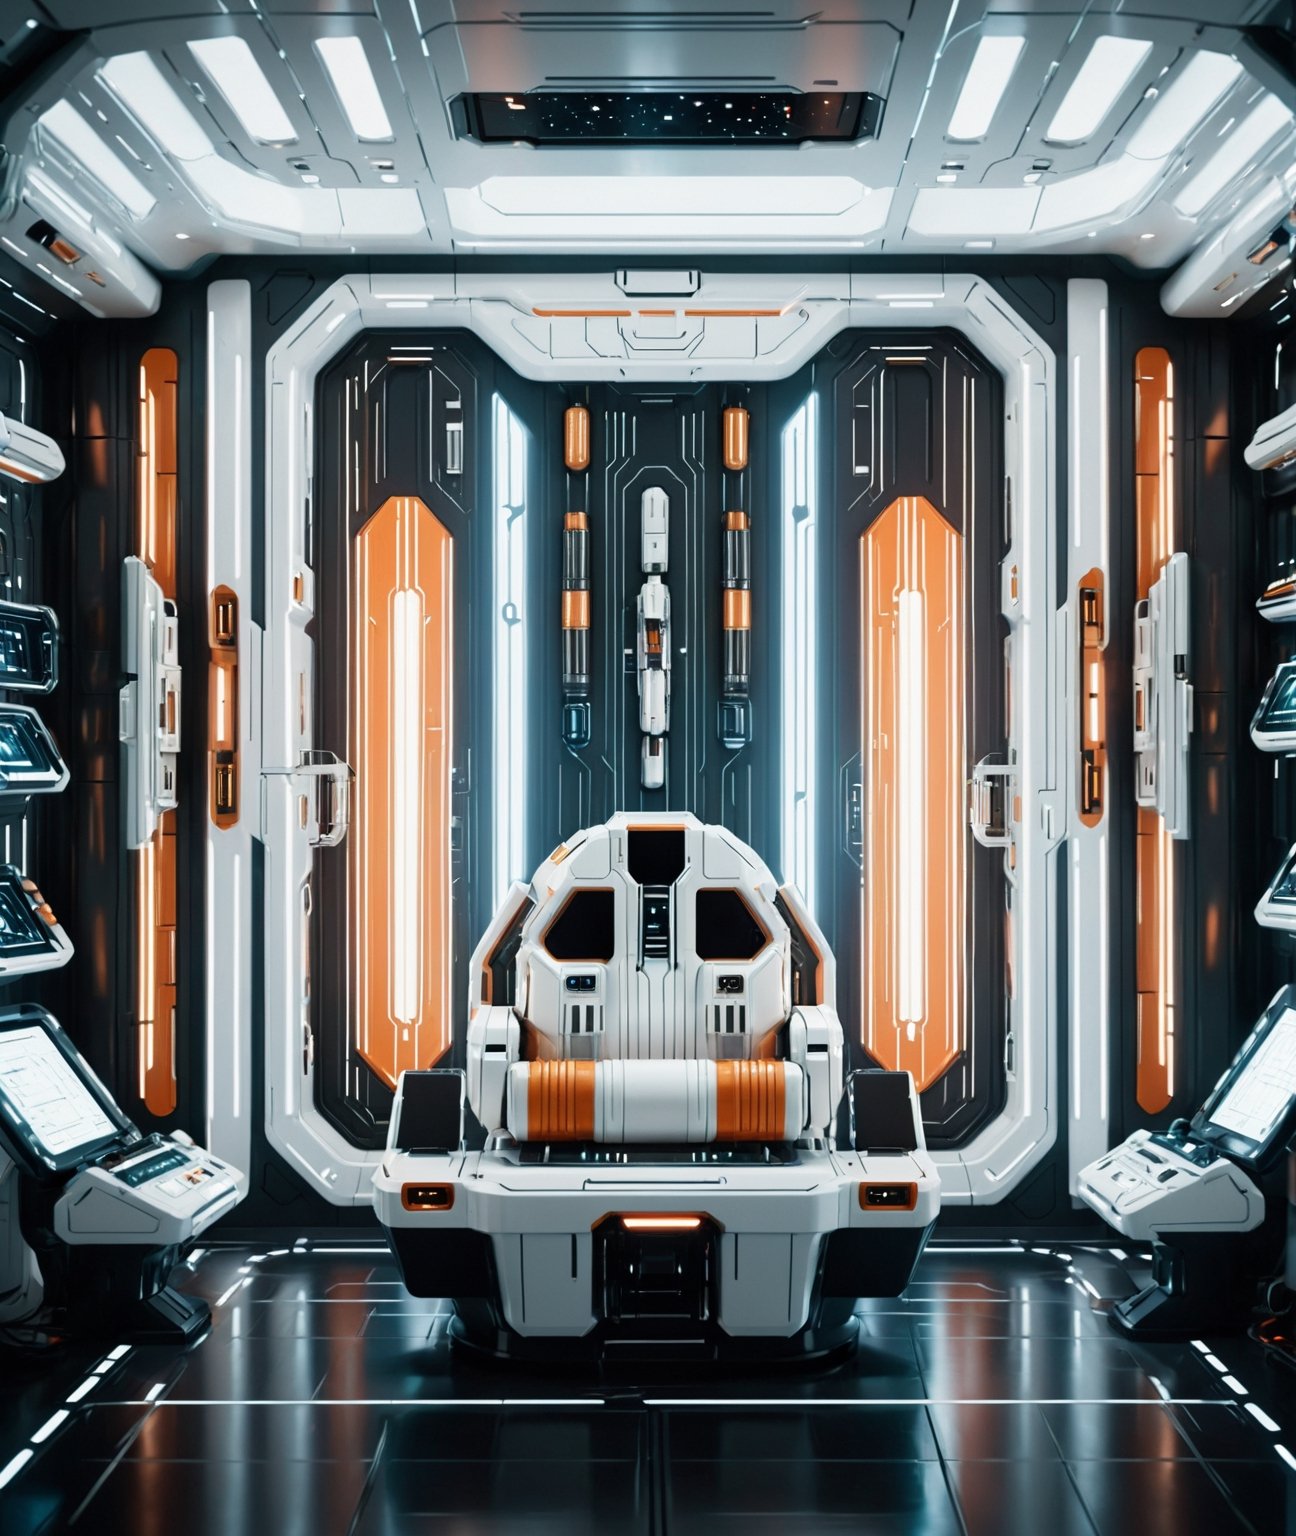 Retrograde background, interior of spacecraft, dark white and orange, realistic color scheme, skincare laboratory, vibrant illustrations, rendered in movie 4D style, illuminated in white, Art Deco style, linear form, full of light, bright image